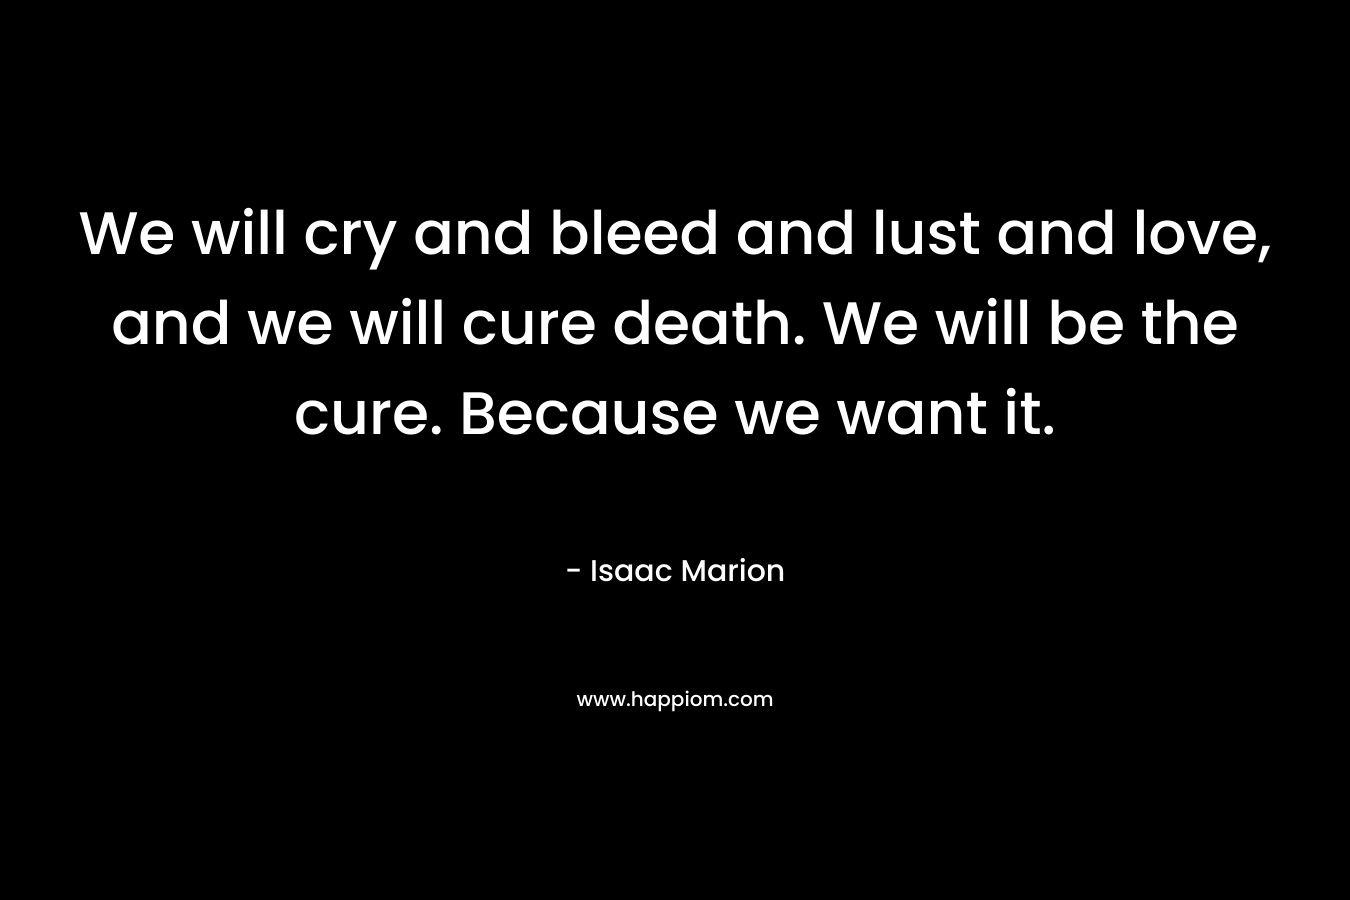 We will cry and bleed and lust and love, and we will cure death. We will be the cure. Because we want it.